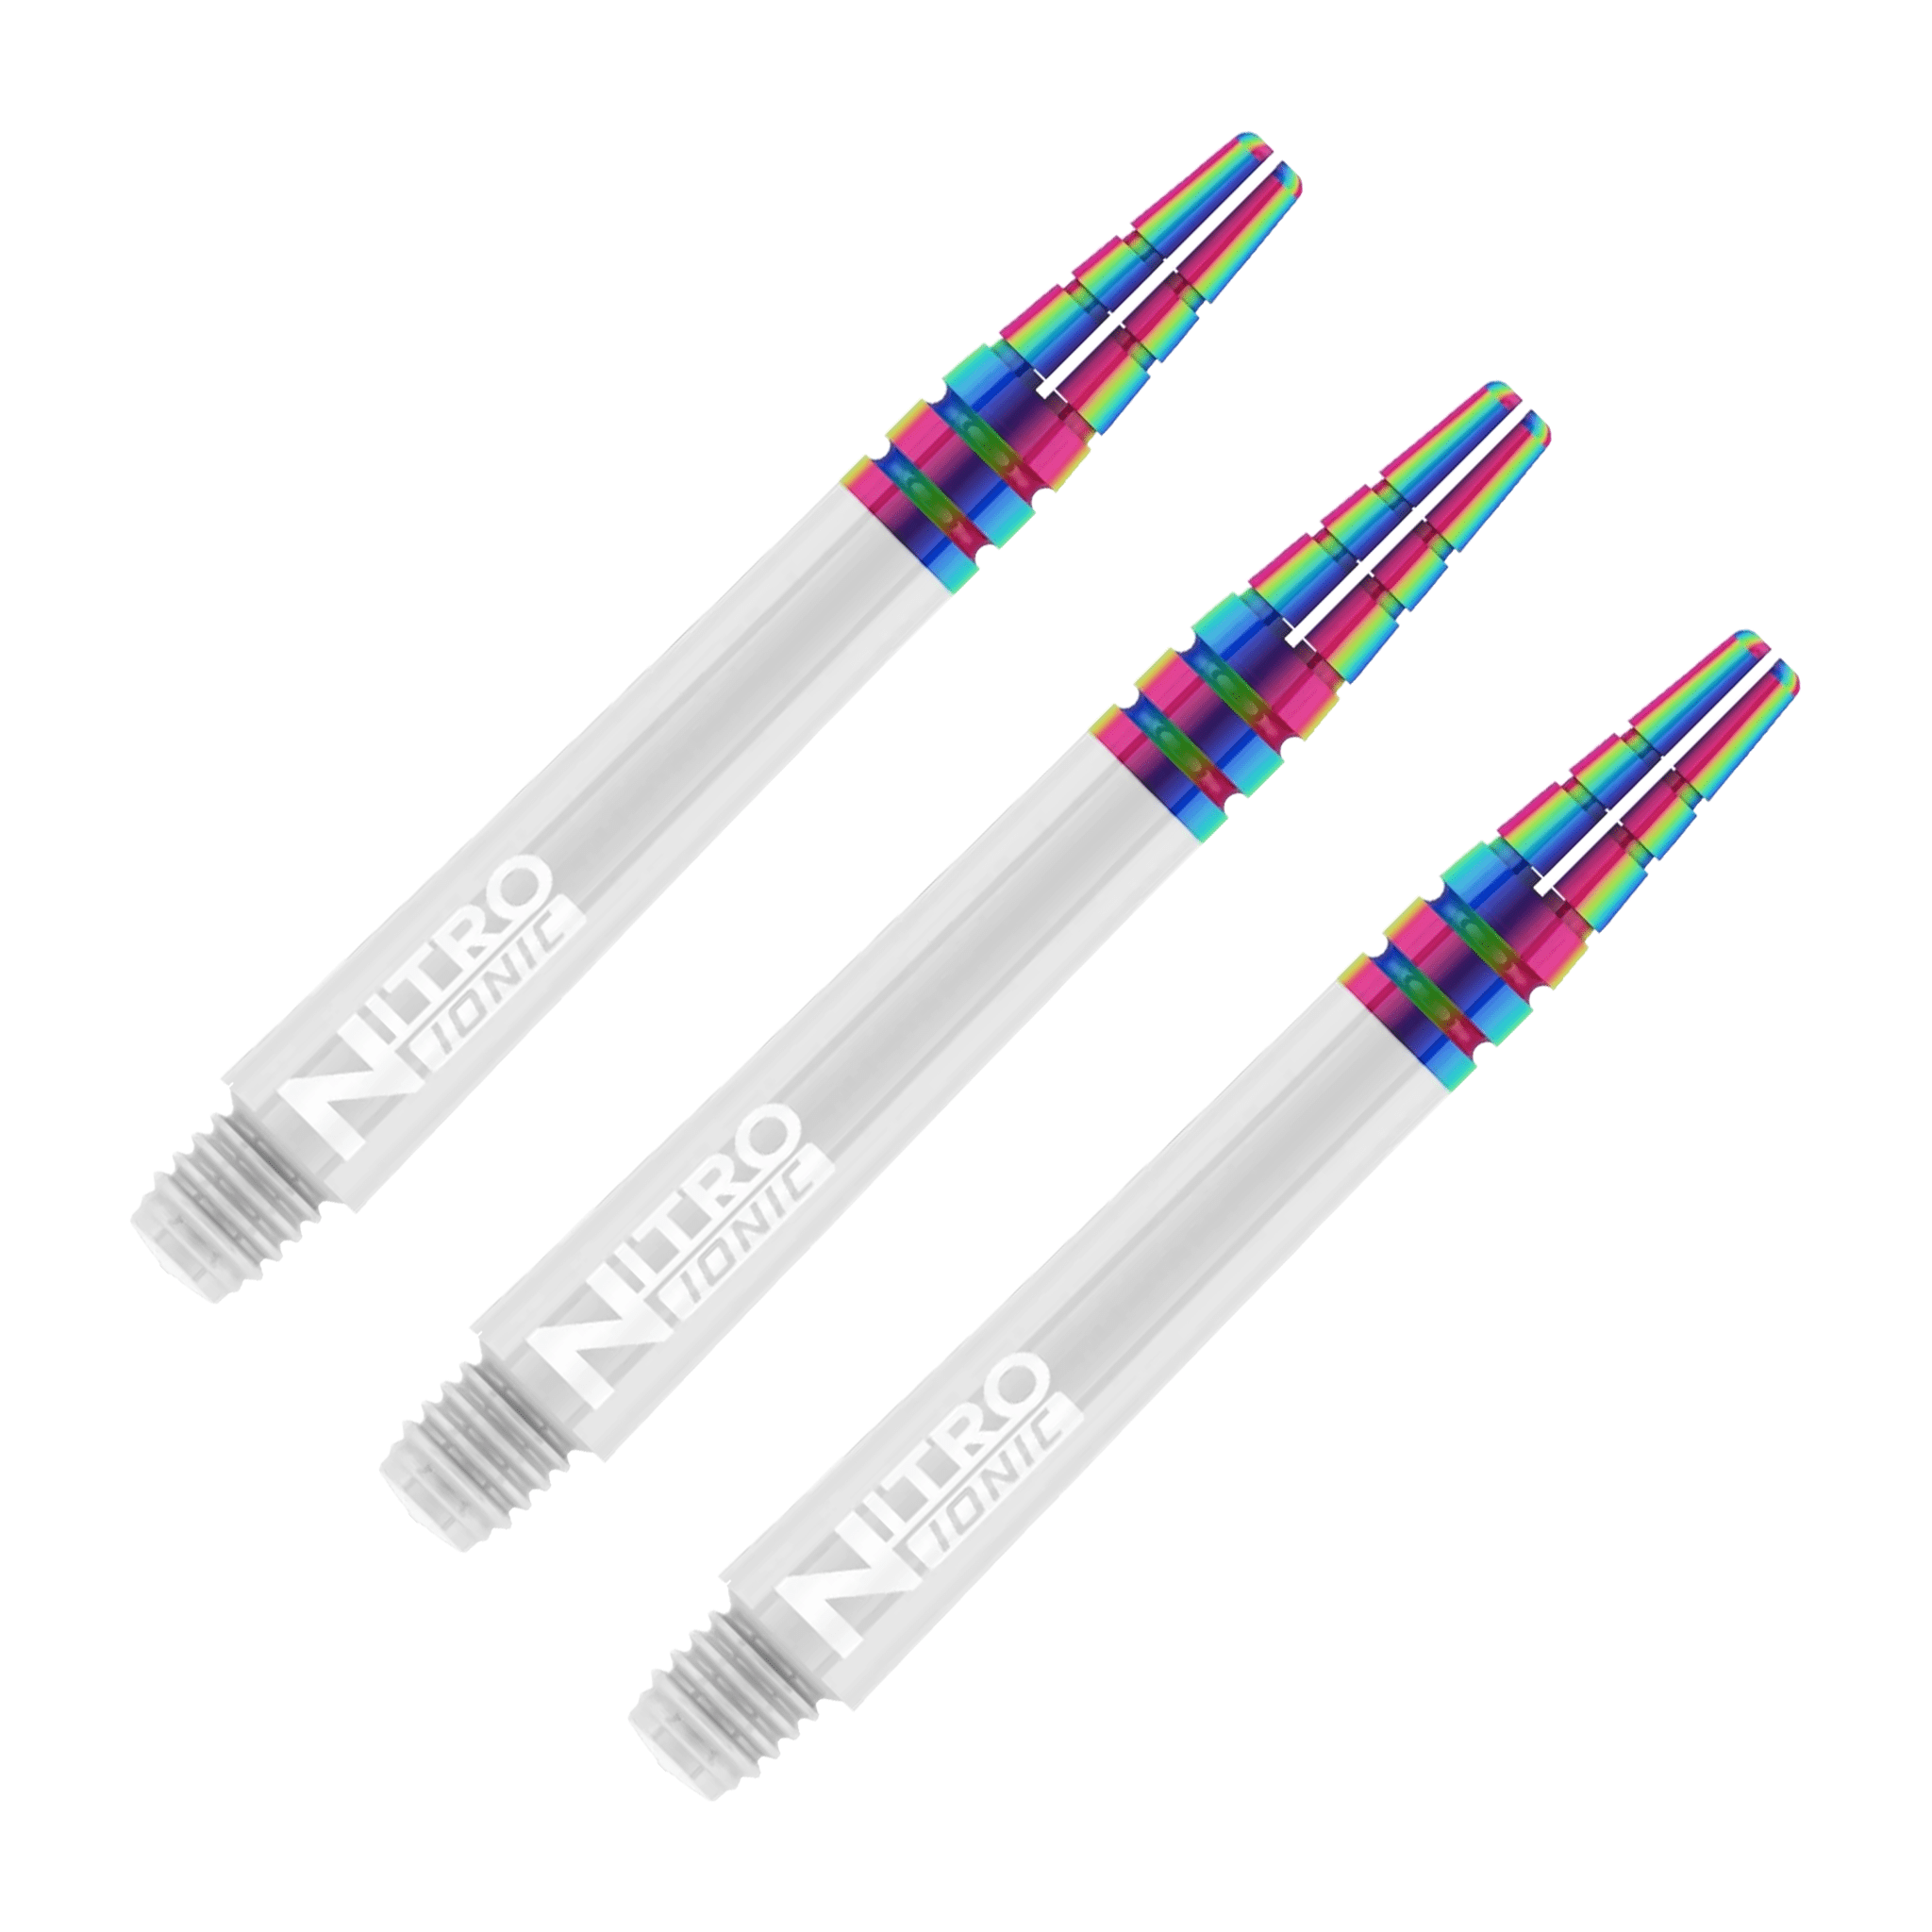 Red Dragon Nitrotech Ionic - Polycarbonate Dart Shafts Intermediate (39mm) / White Shafts